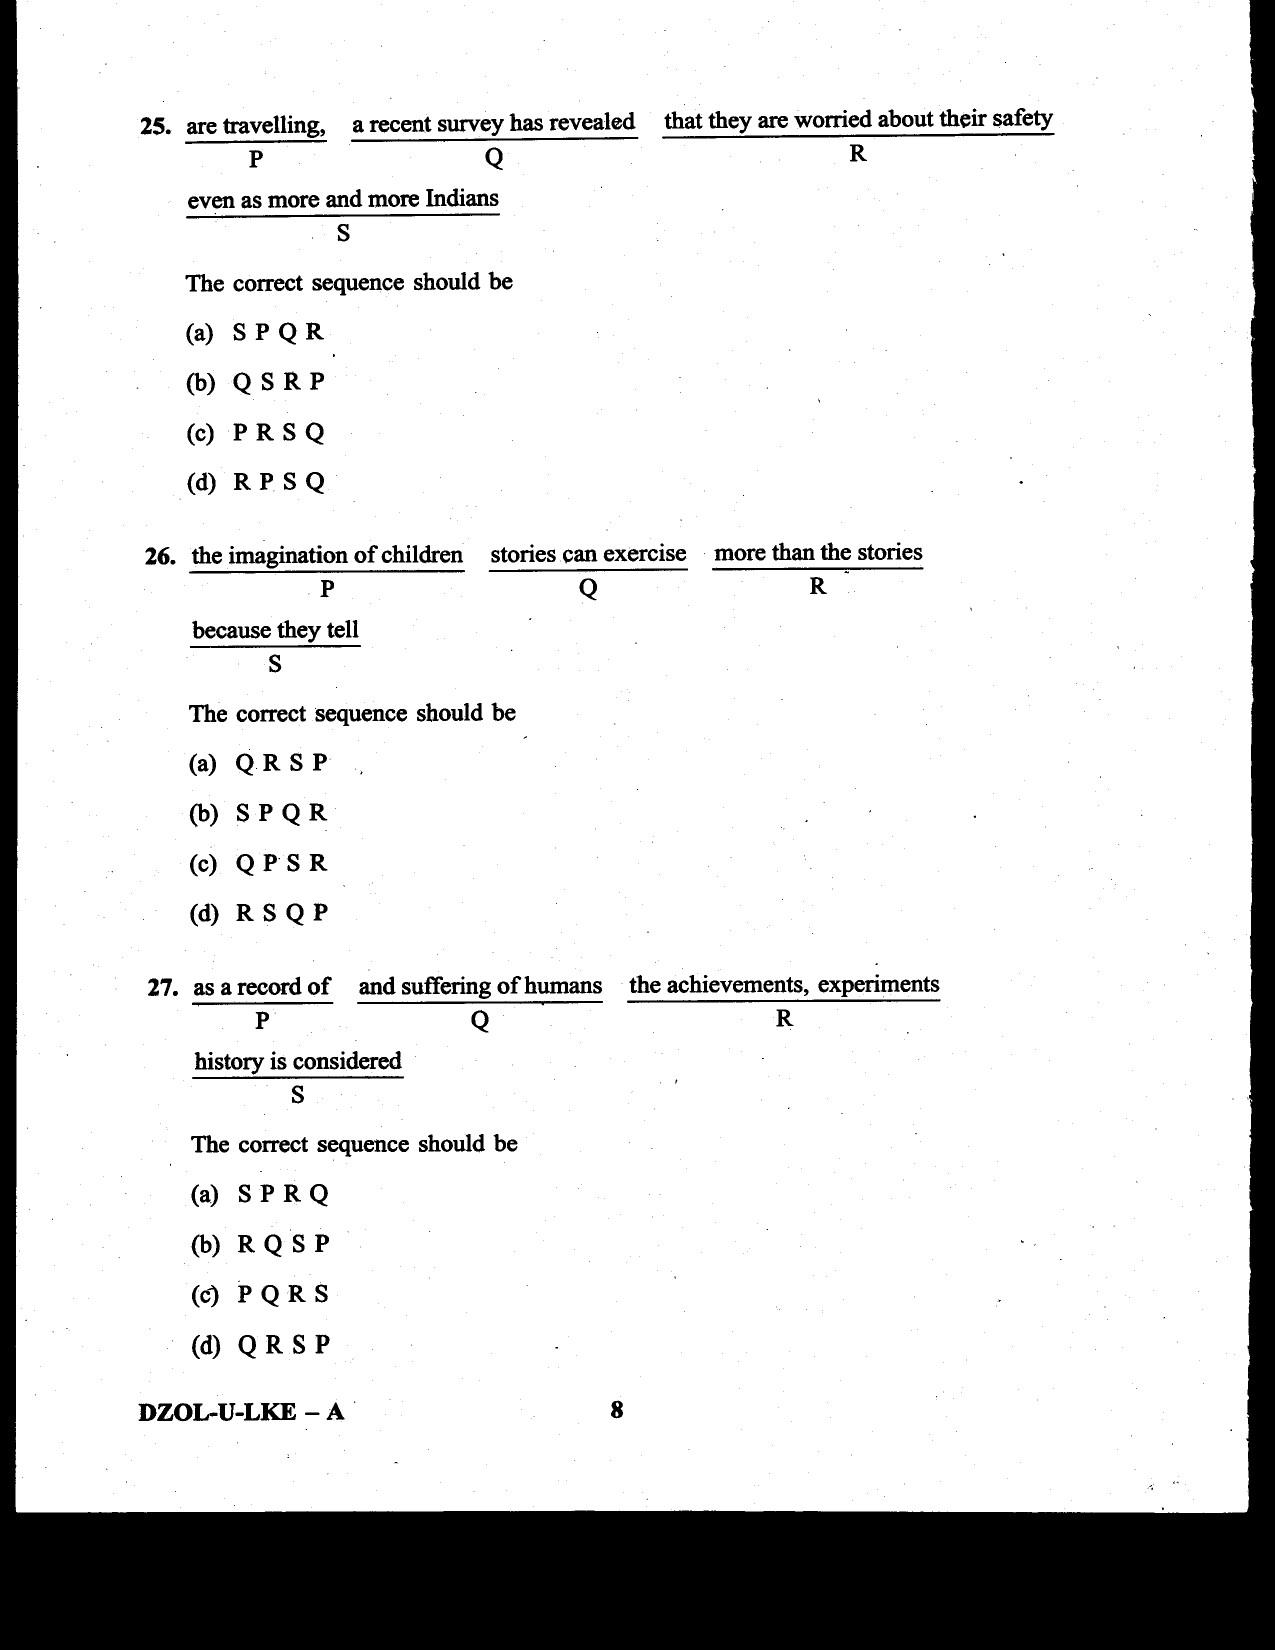 CDS II Examination 2020 English Question Paper - Image 8